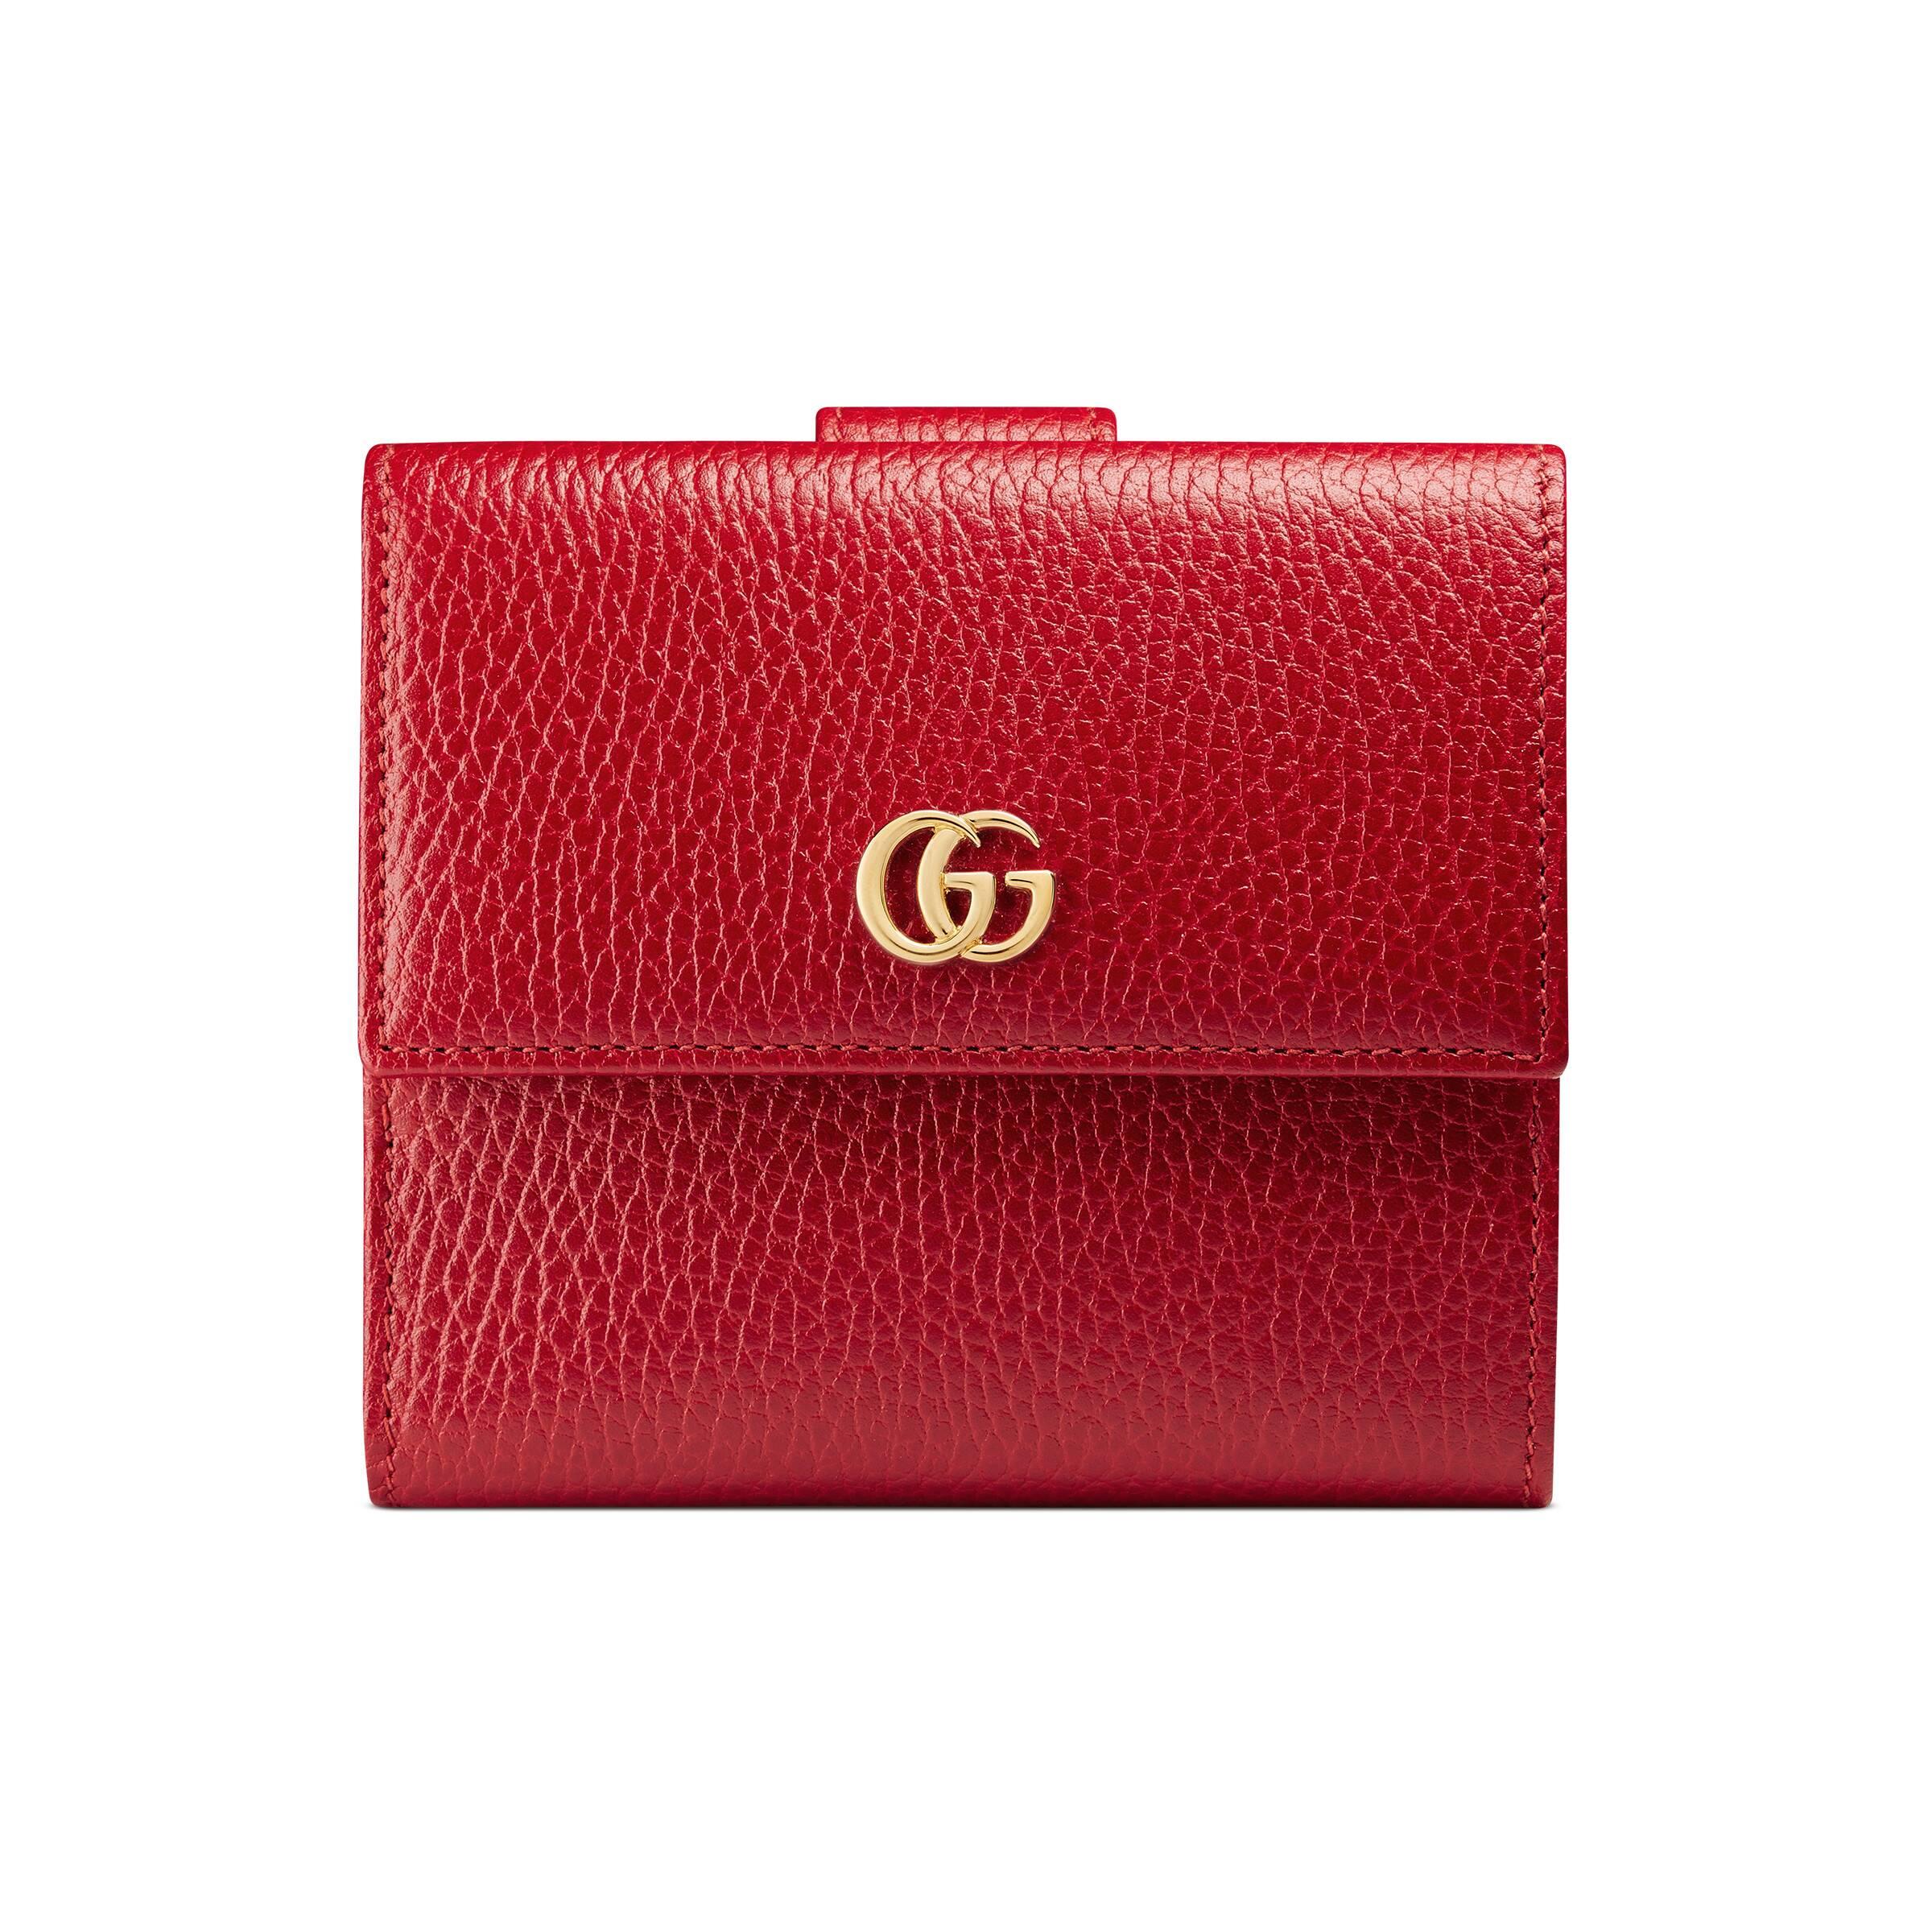 Gucci Leather French Flap Wallet in Red - Lyst